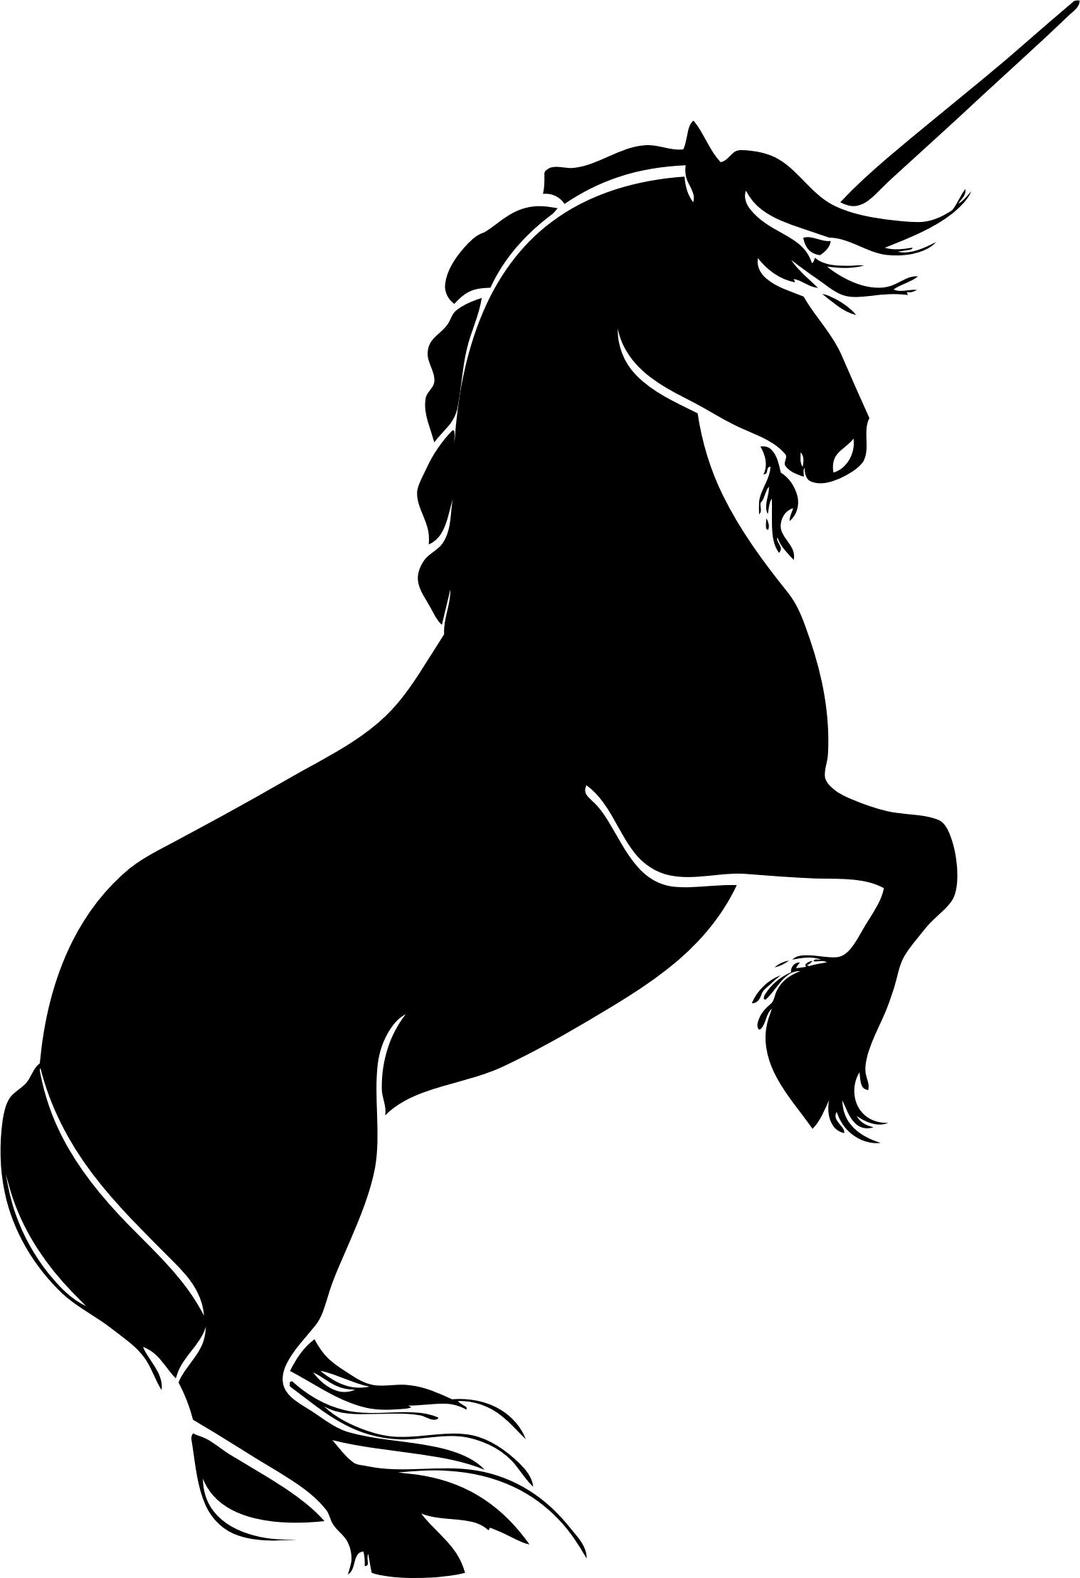 Rearing Unicorn Silhouette png transparent